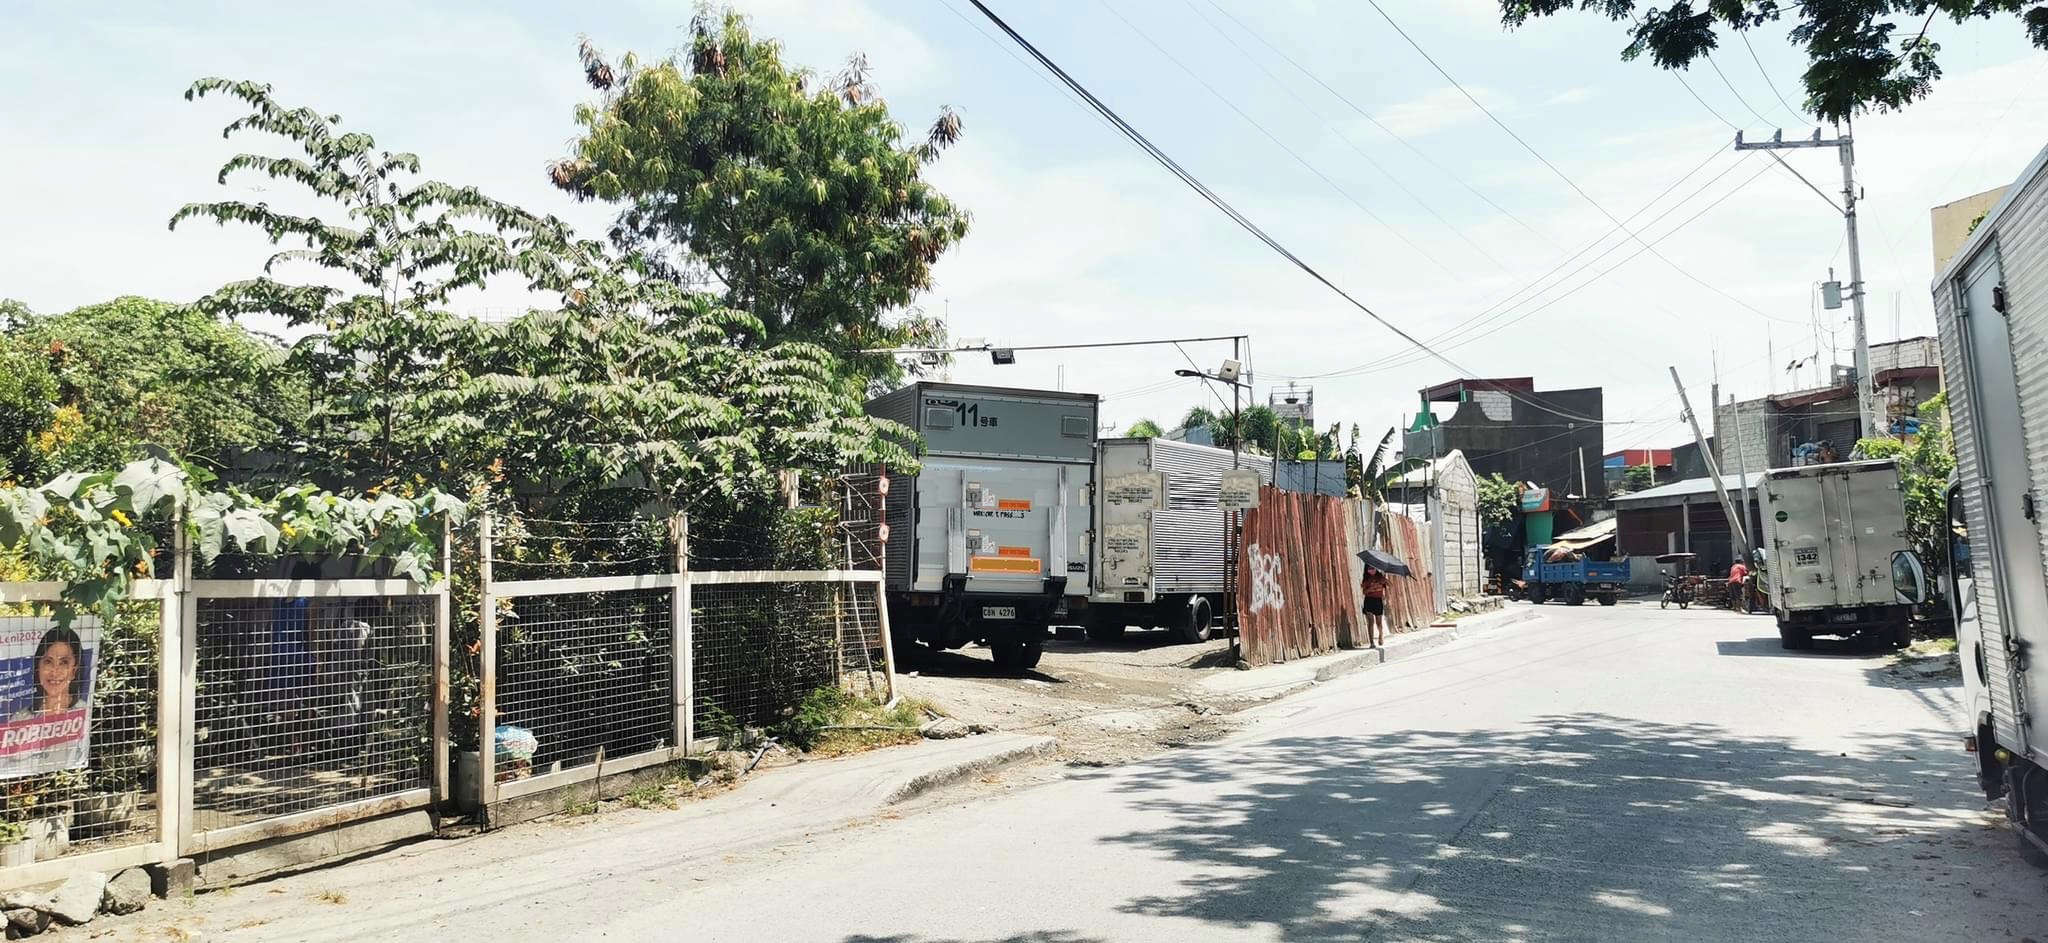 COMMERCIAL/ INDUSTRIAL LOT PROPERTY FOR SALE in Taguig Ciy‼️